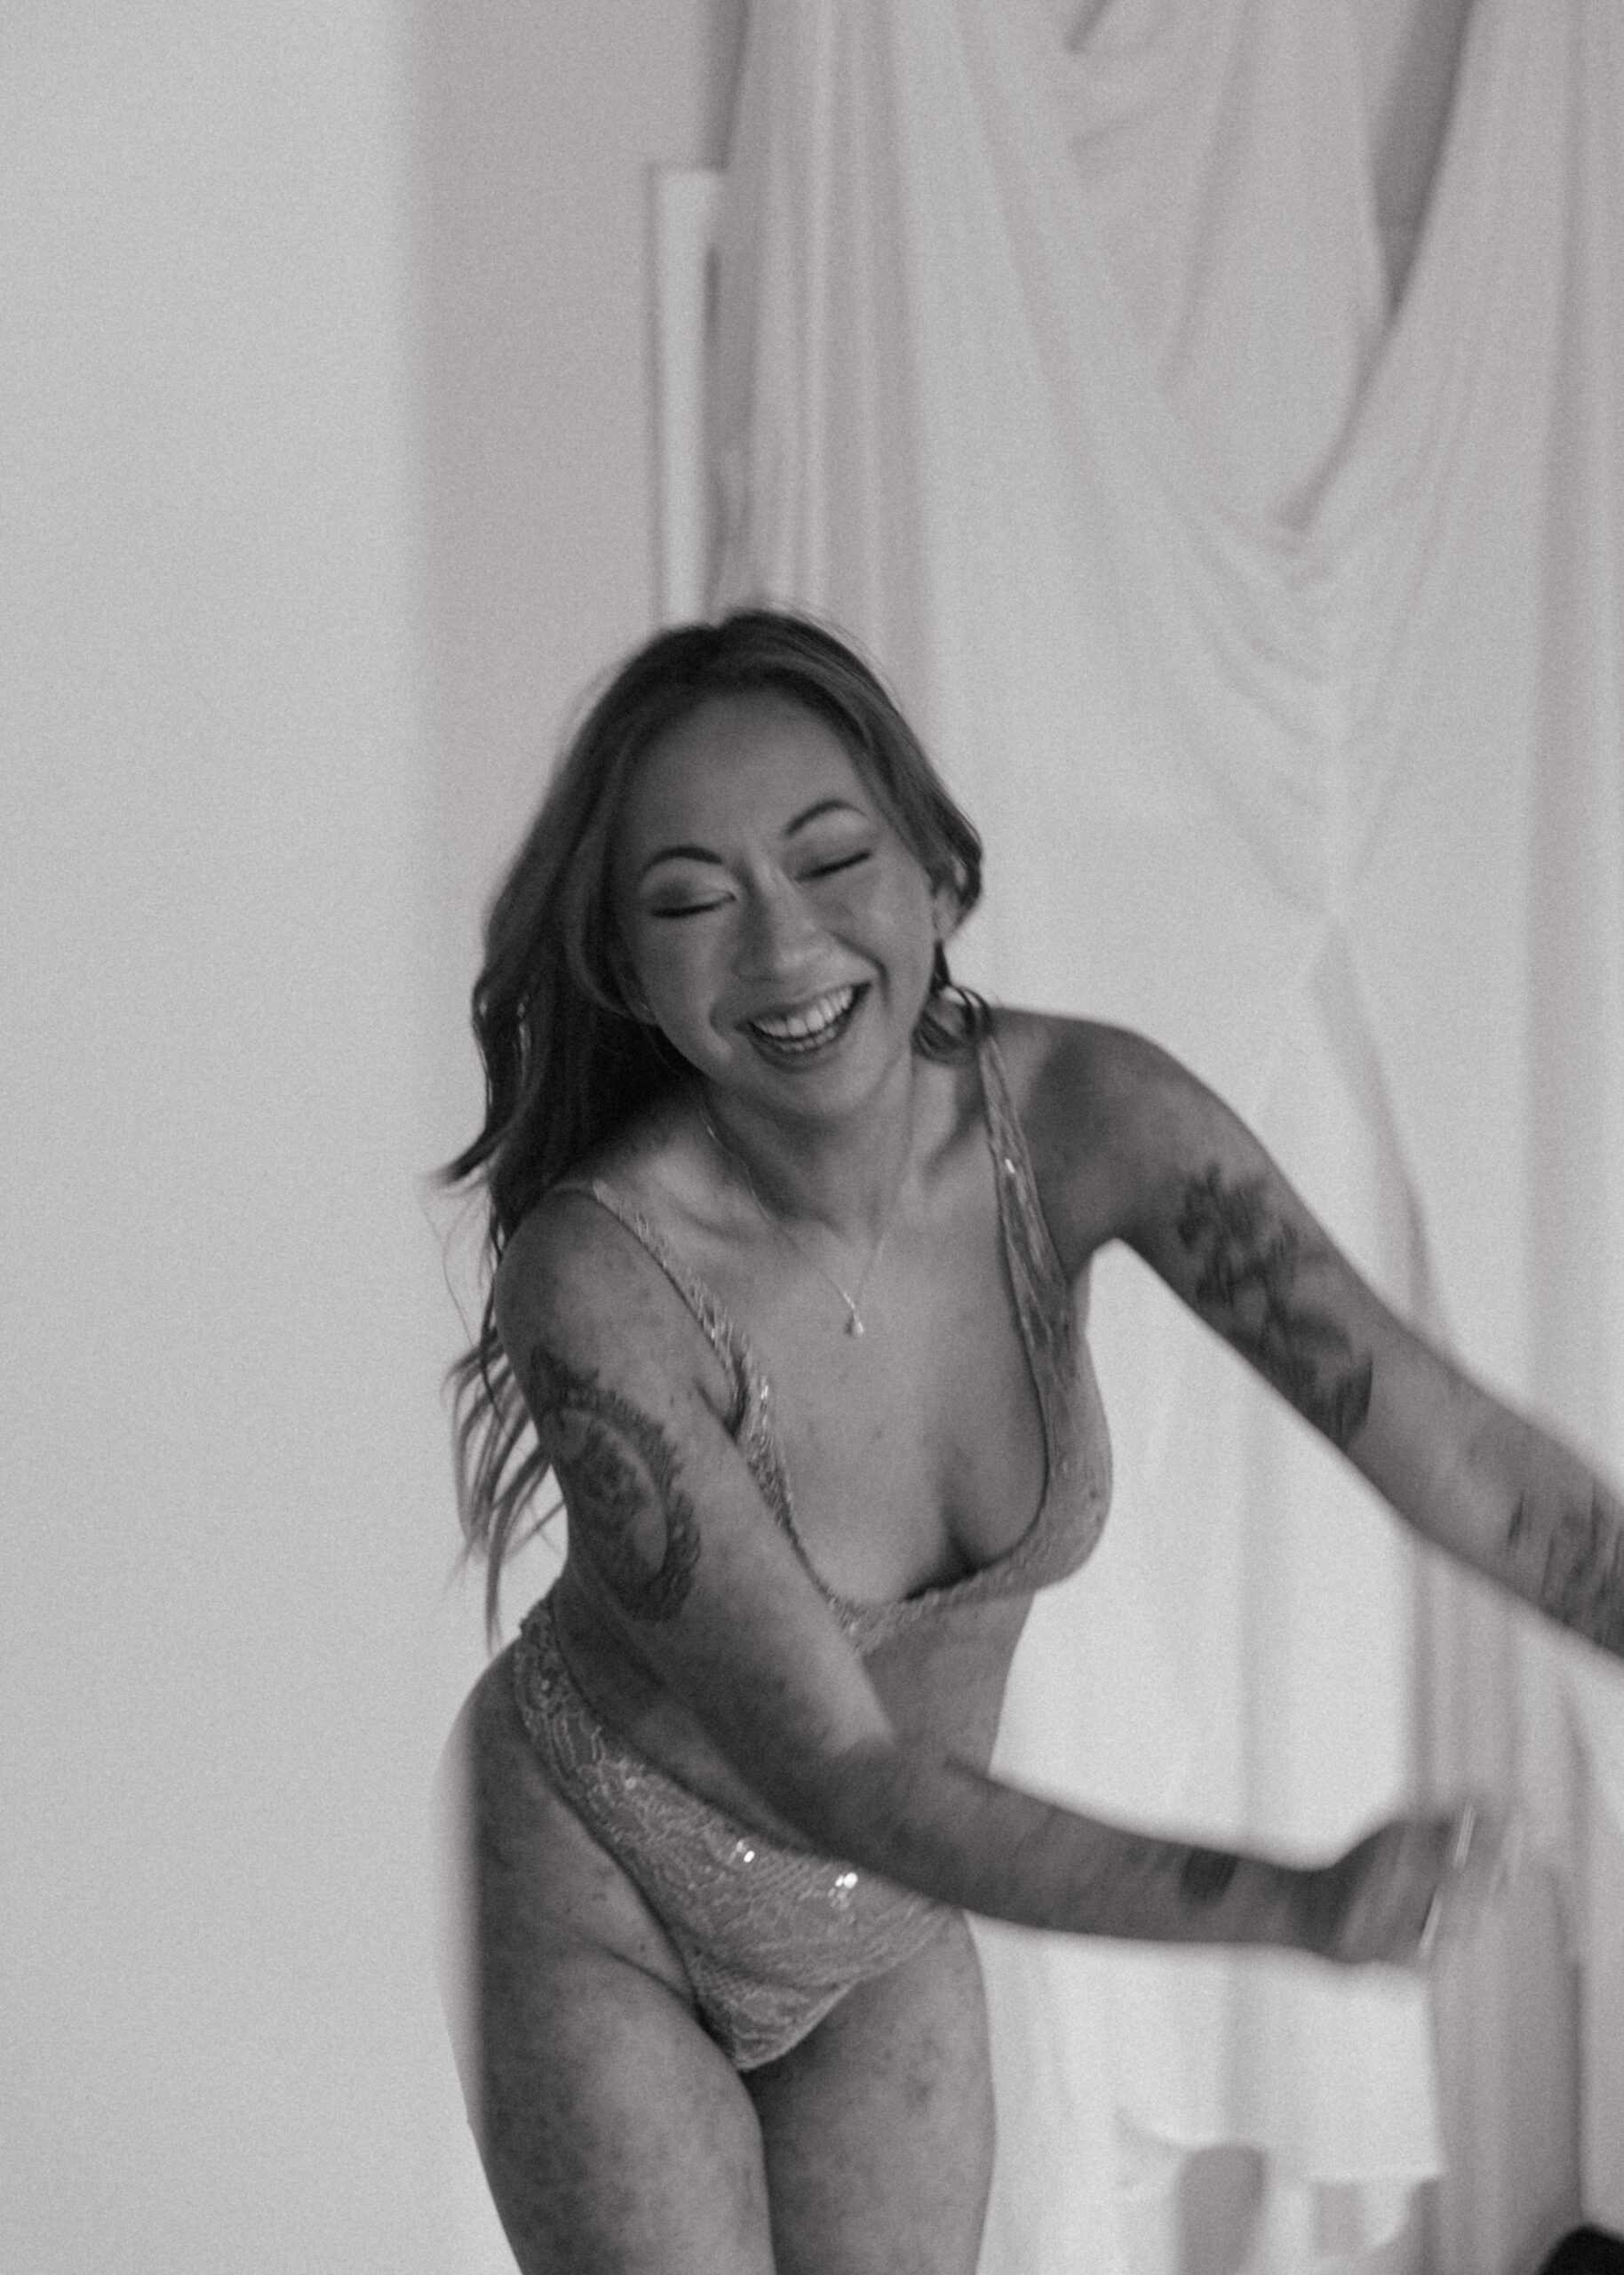 a woman in lingerie laughing during an artistic collaboration photoshoot